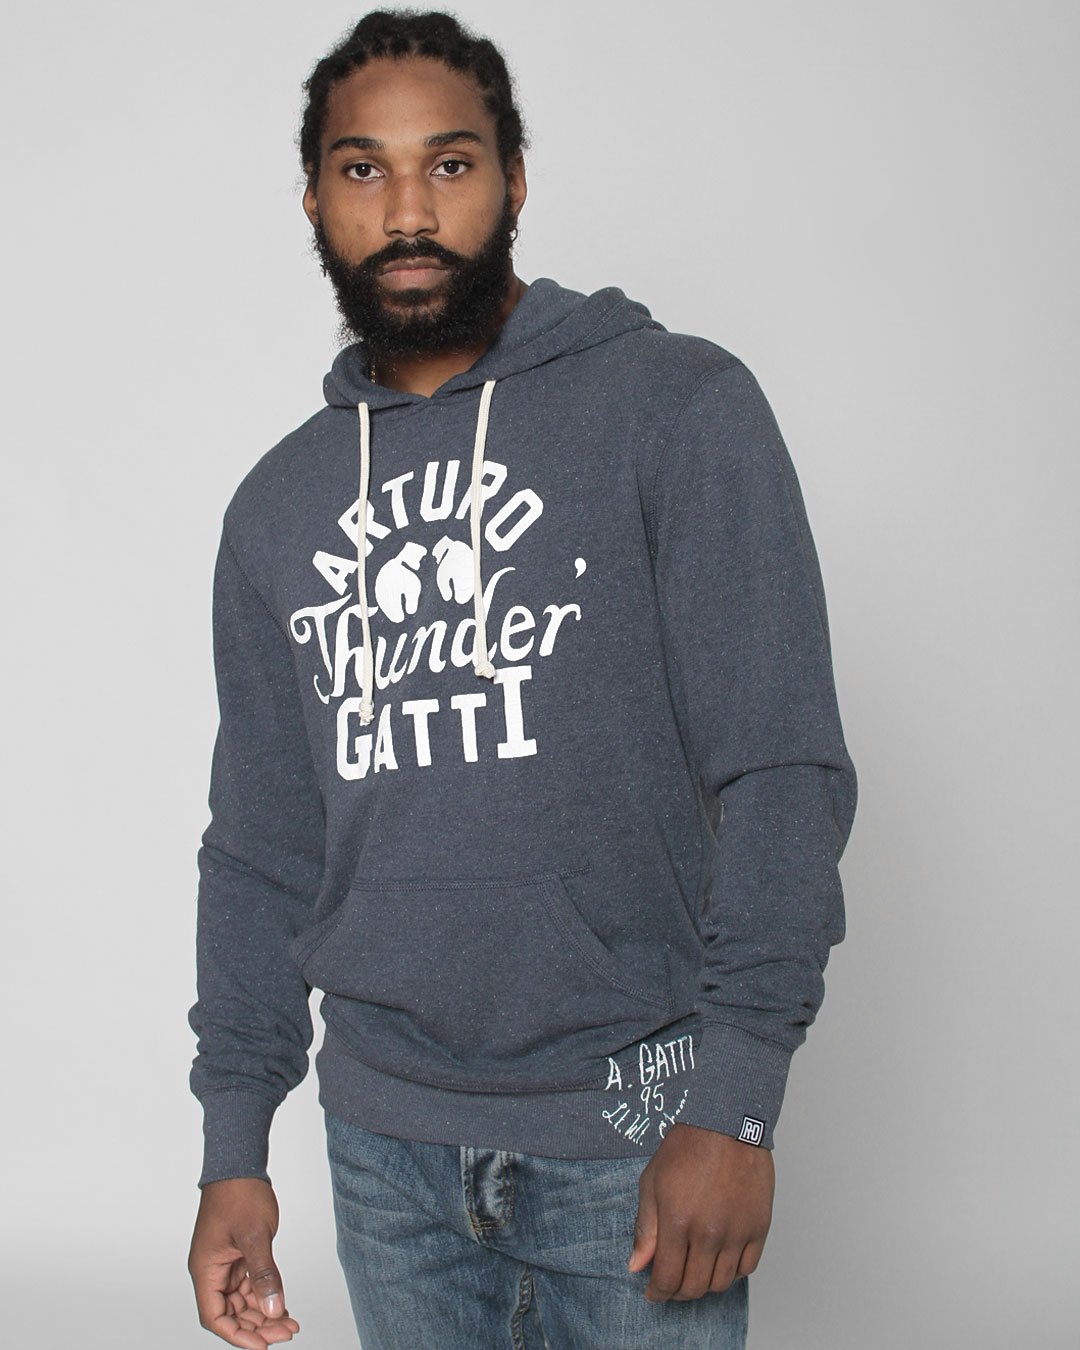 Gatti Thunder Pullover Hoody - Roots of Fight